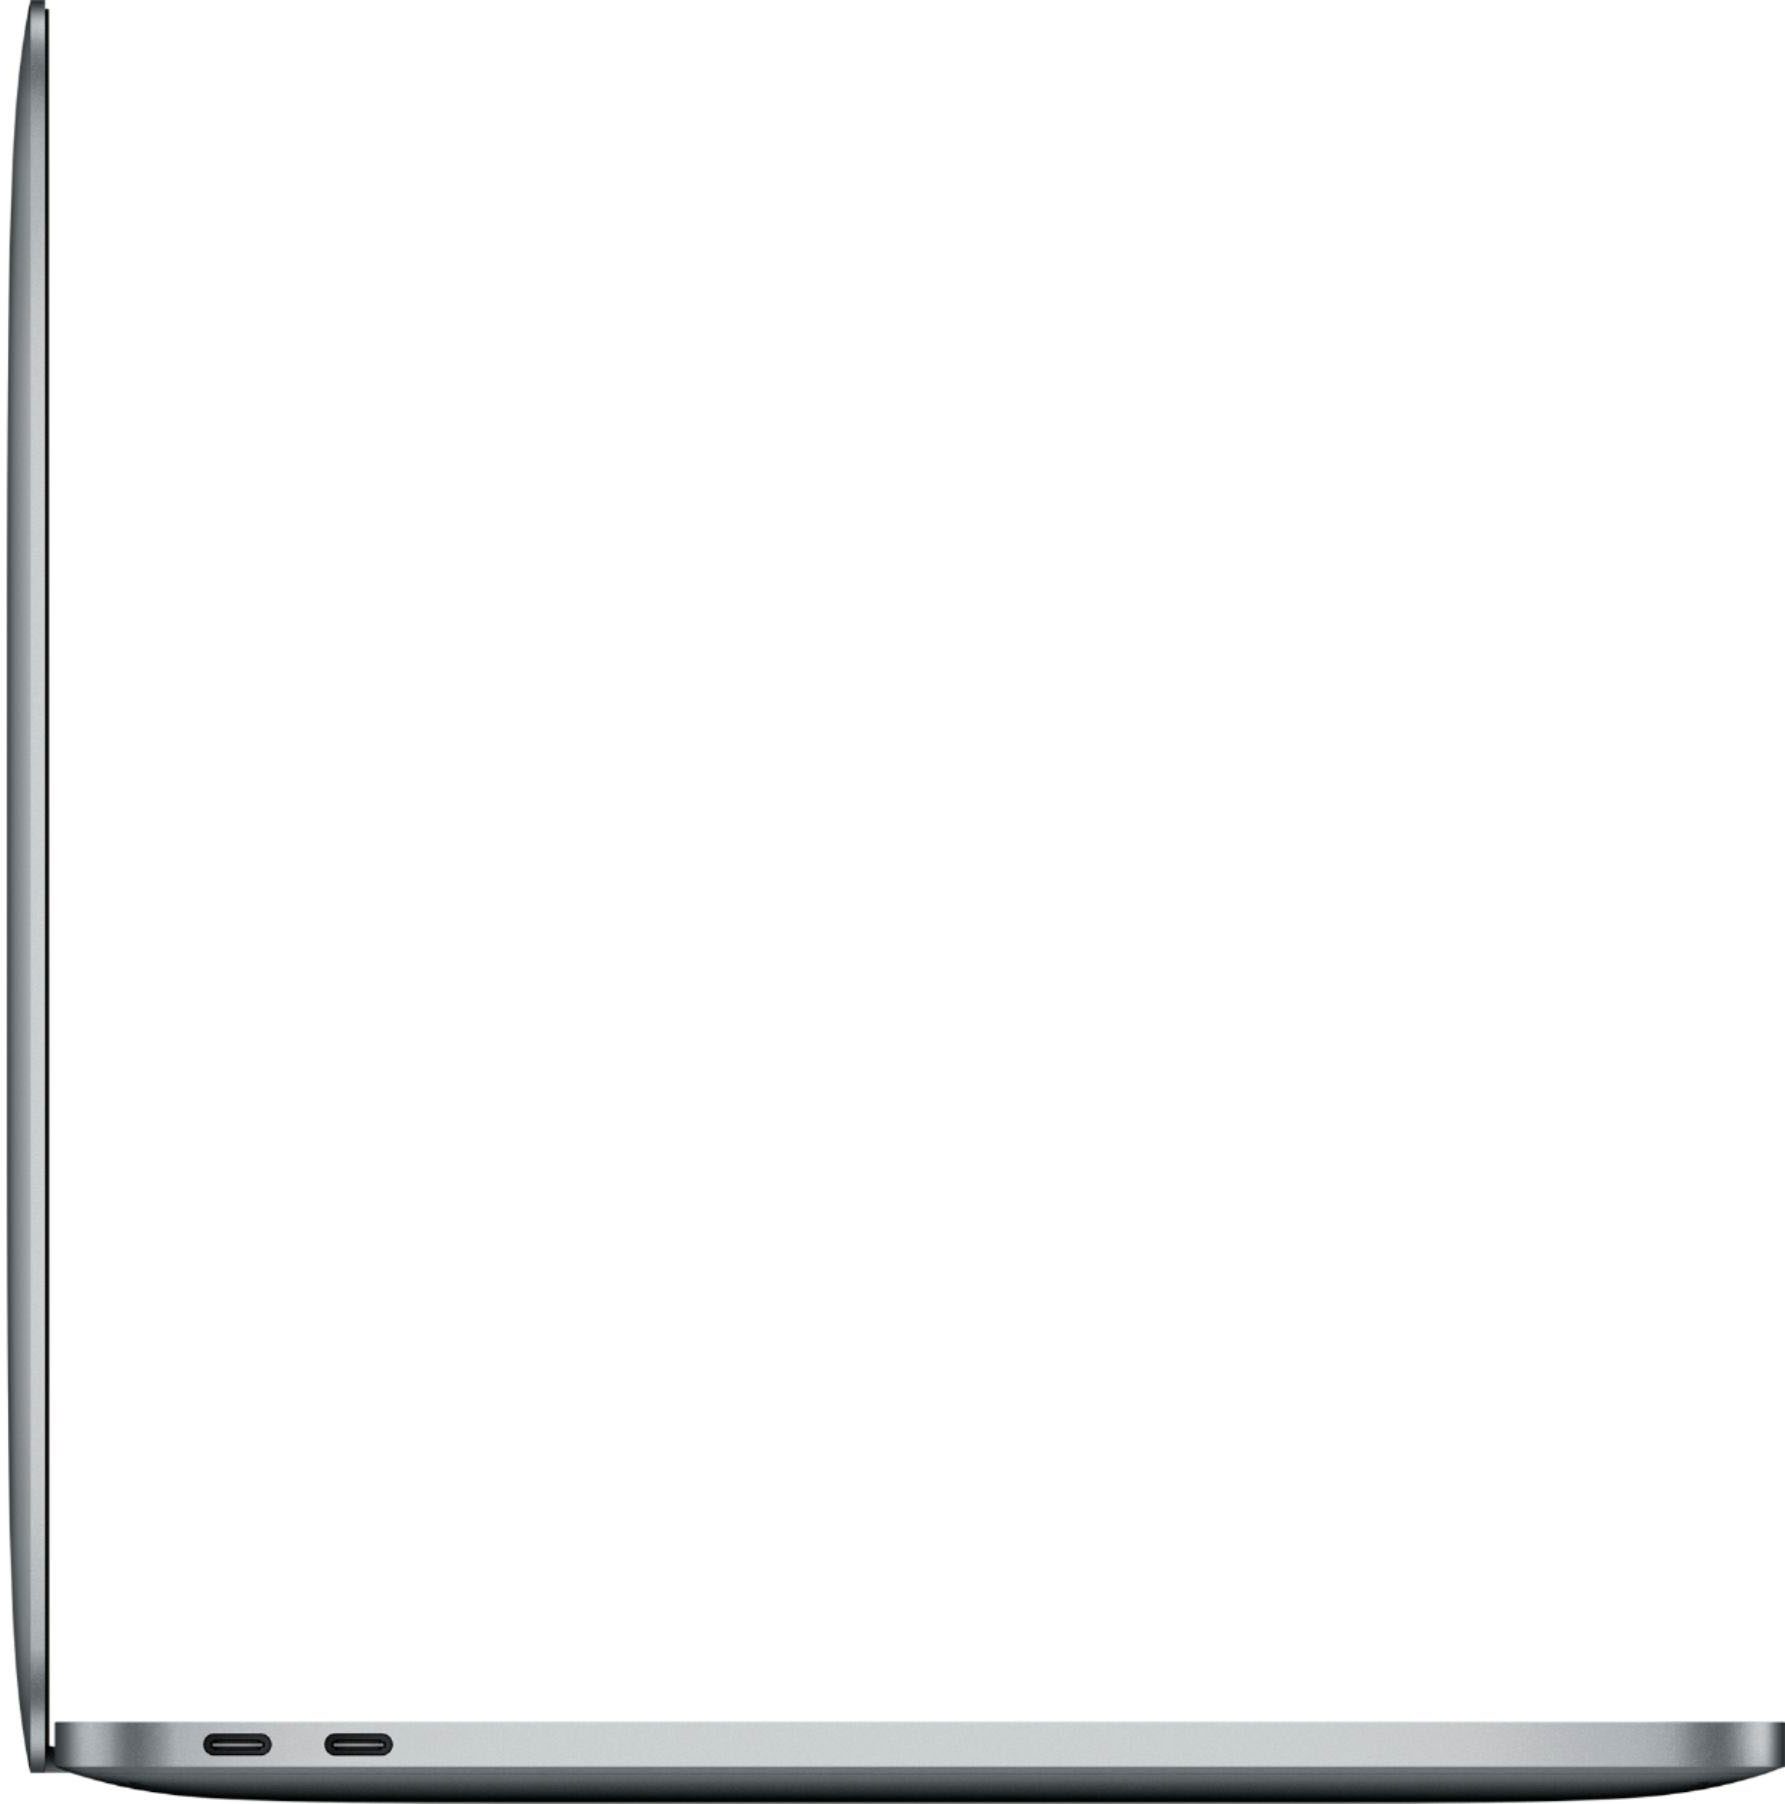 Apple – Refurbished MacBook Pro – 15″ Display with Touch Bar – Intel Core i7 – 16GB Memory – AMD Radeon Pro 555X – 256GB SSD – Space Gray